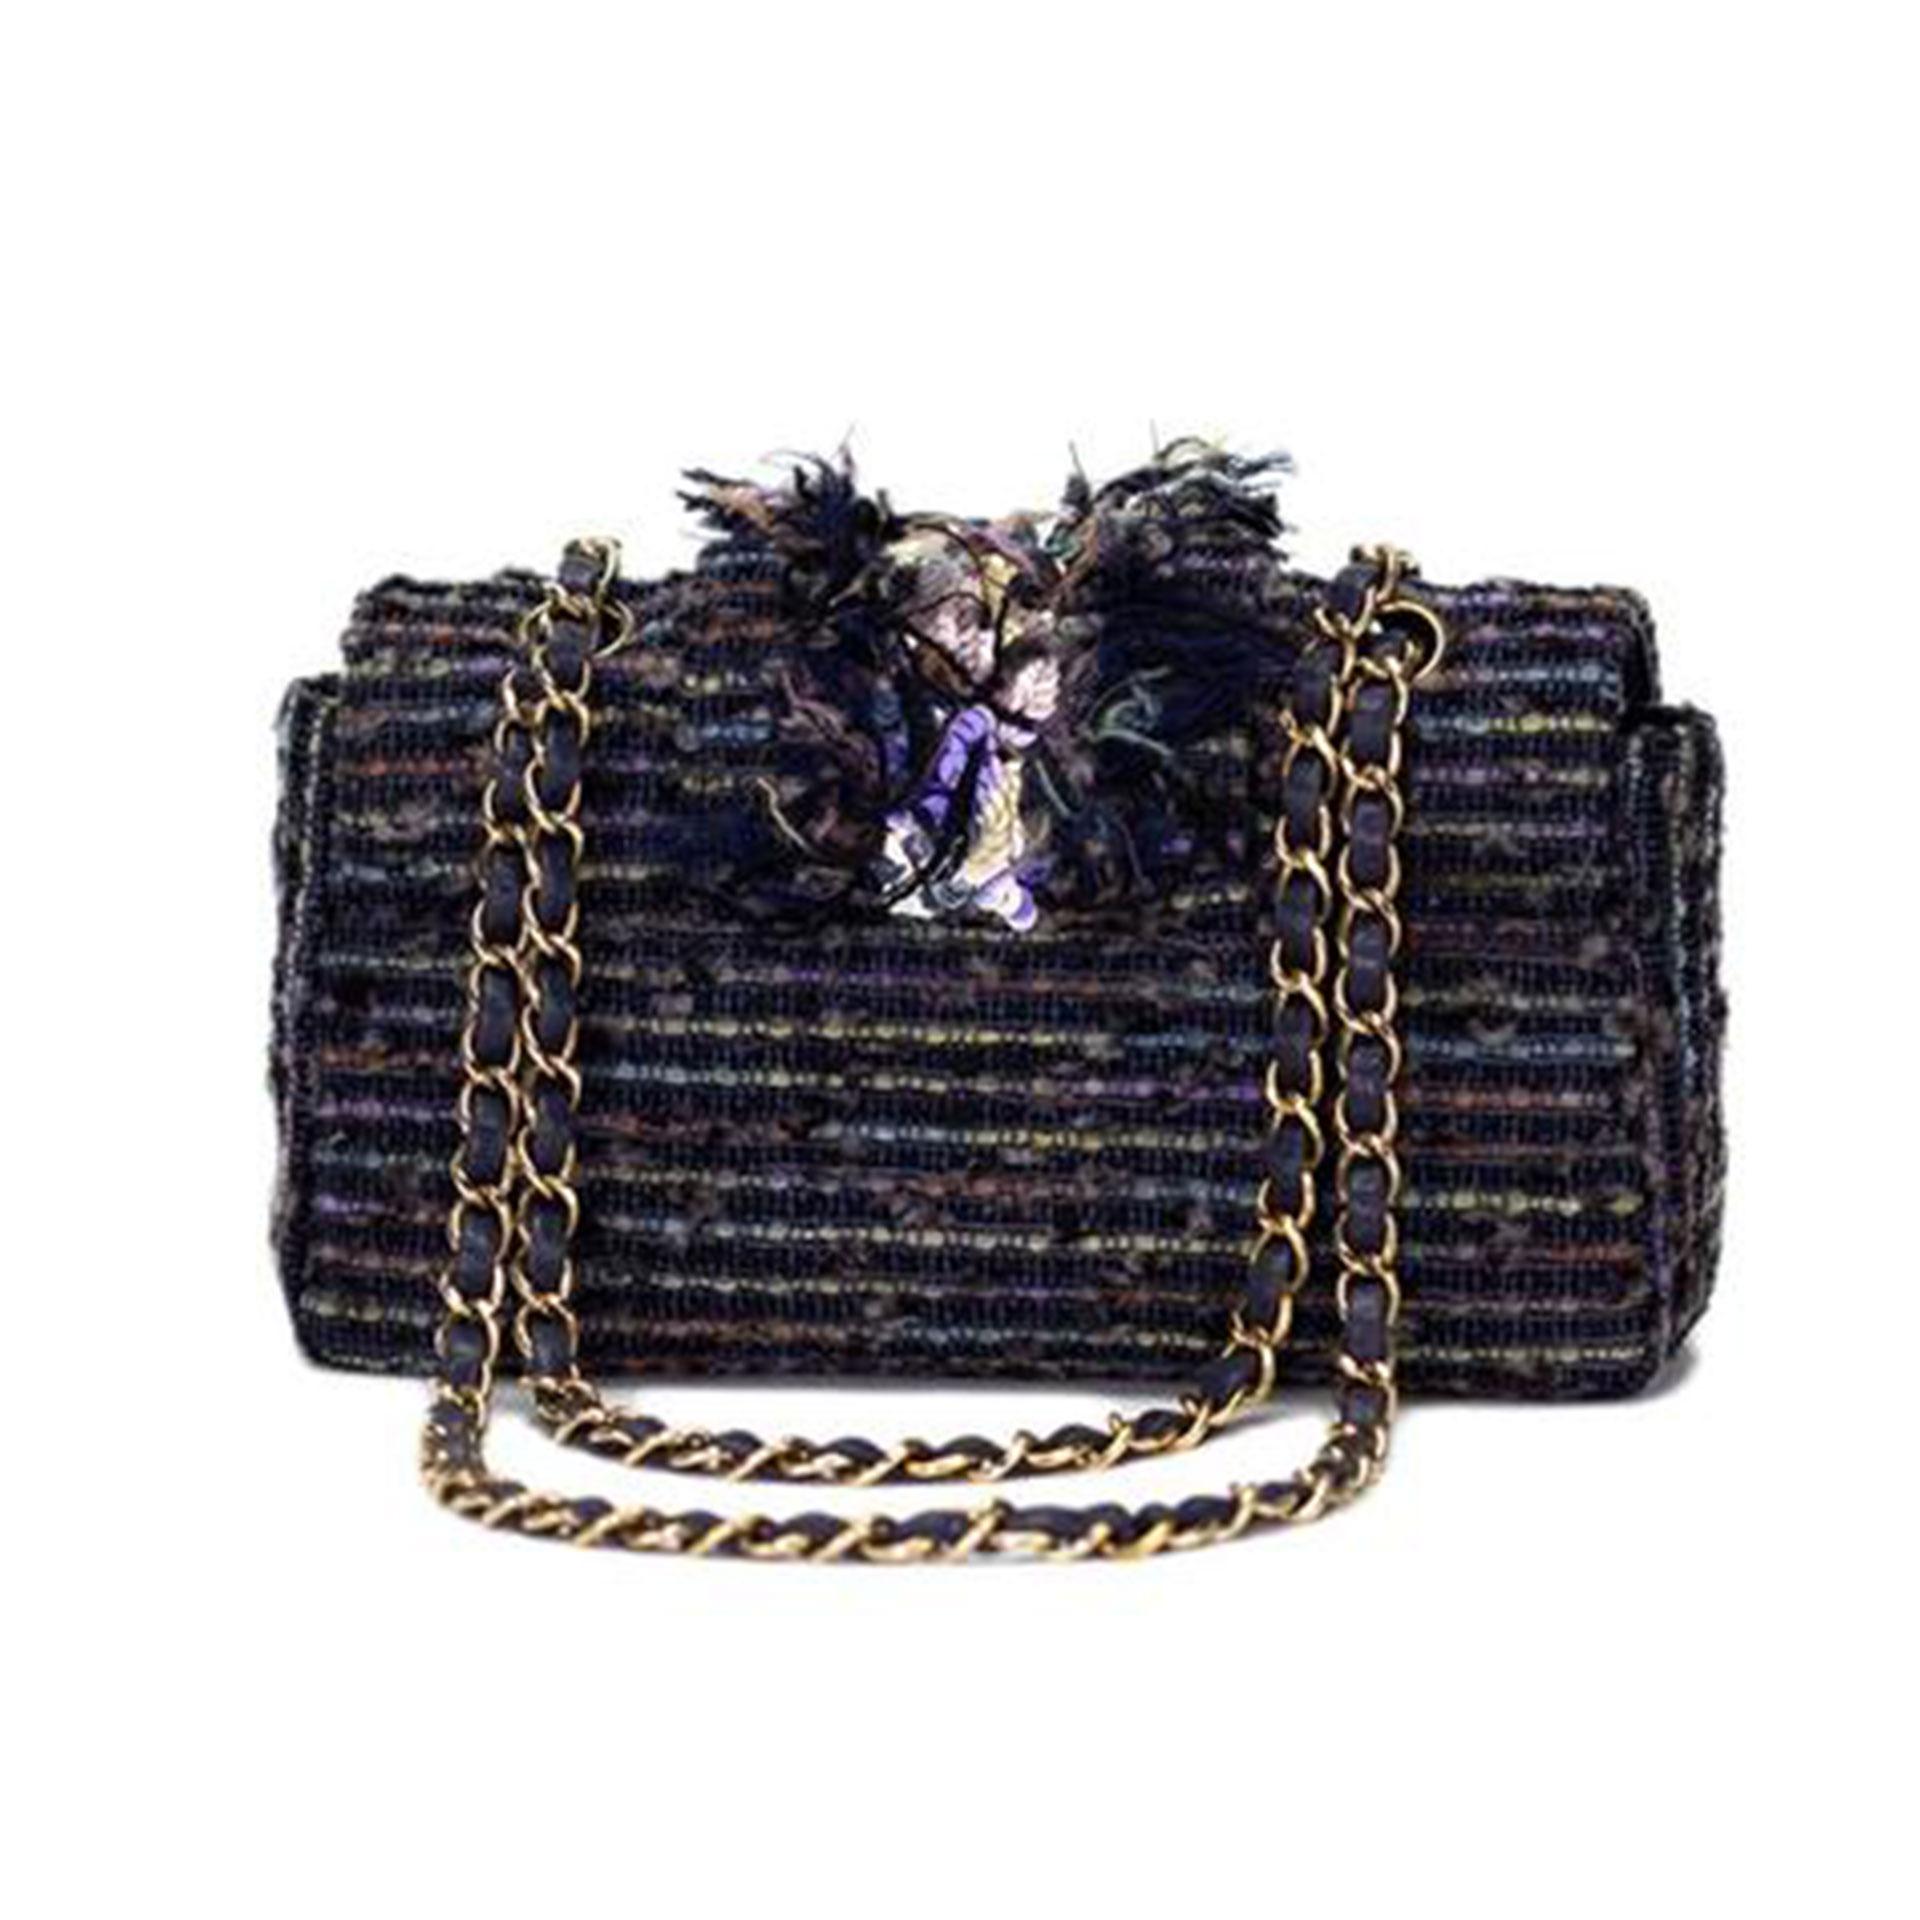 Chanel 2005 Classic Flap Vintage Jeweled Sequin Mermaid Navy Blue Tweed Bag In Good Condition For Sale In Miami, FL